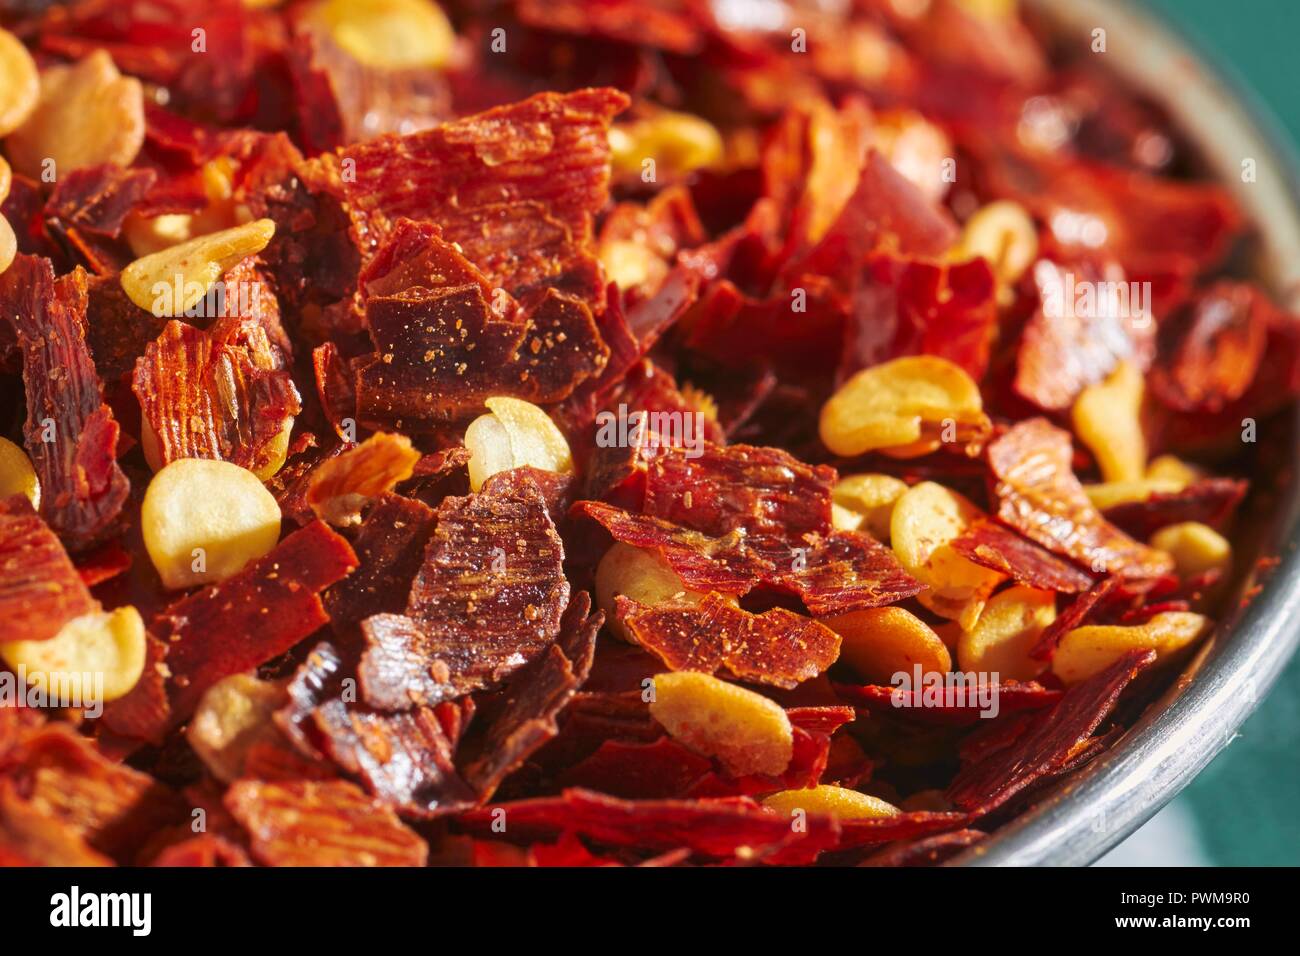 Chilli flakes in a metal bowl Stock Photo